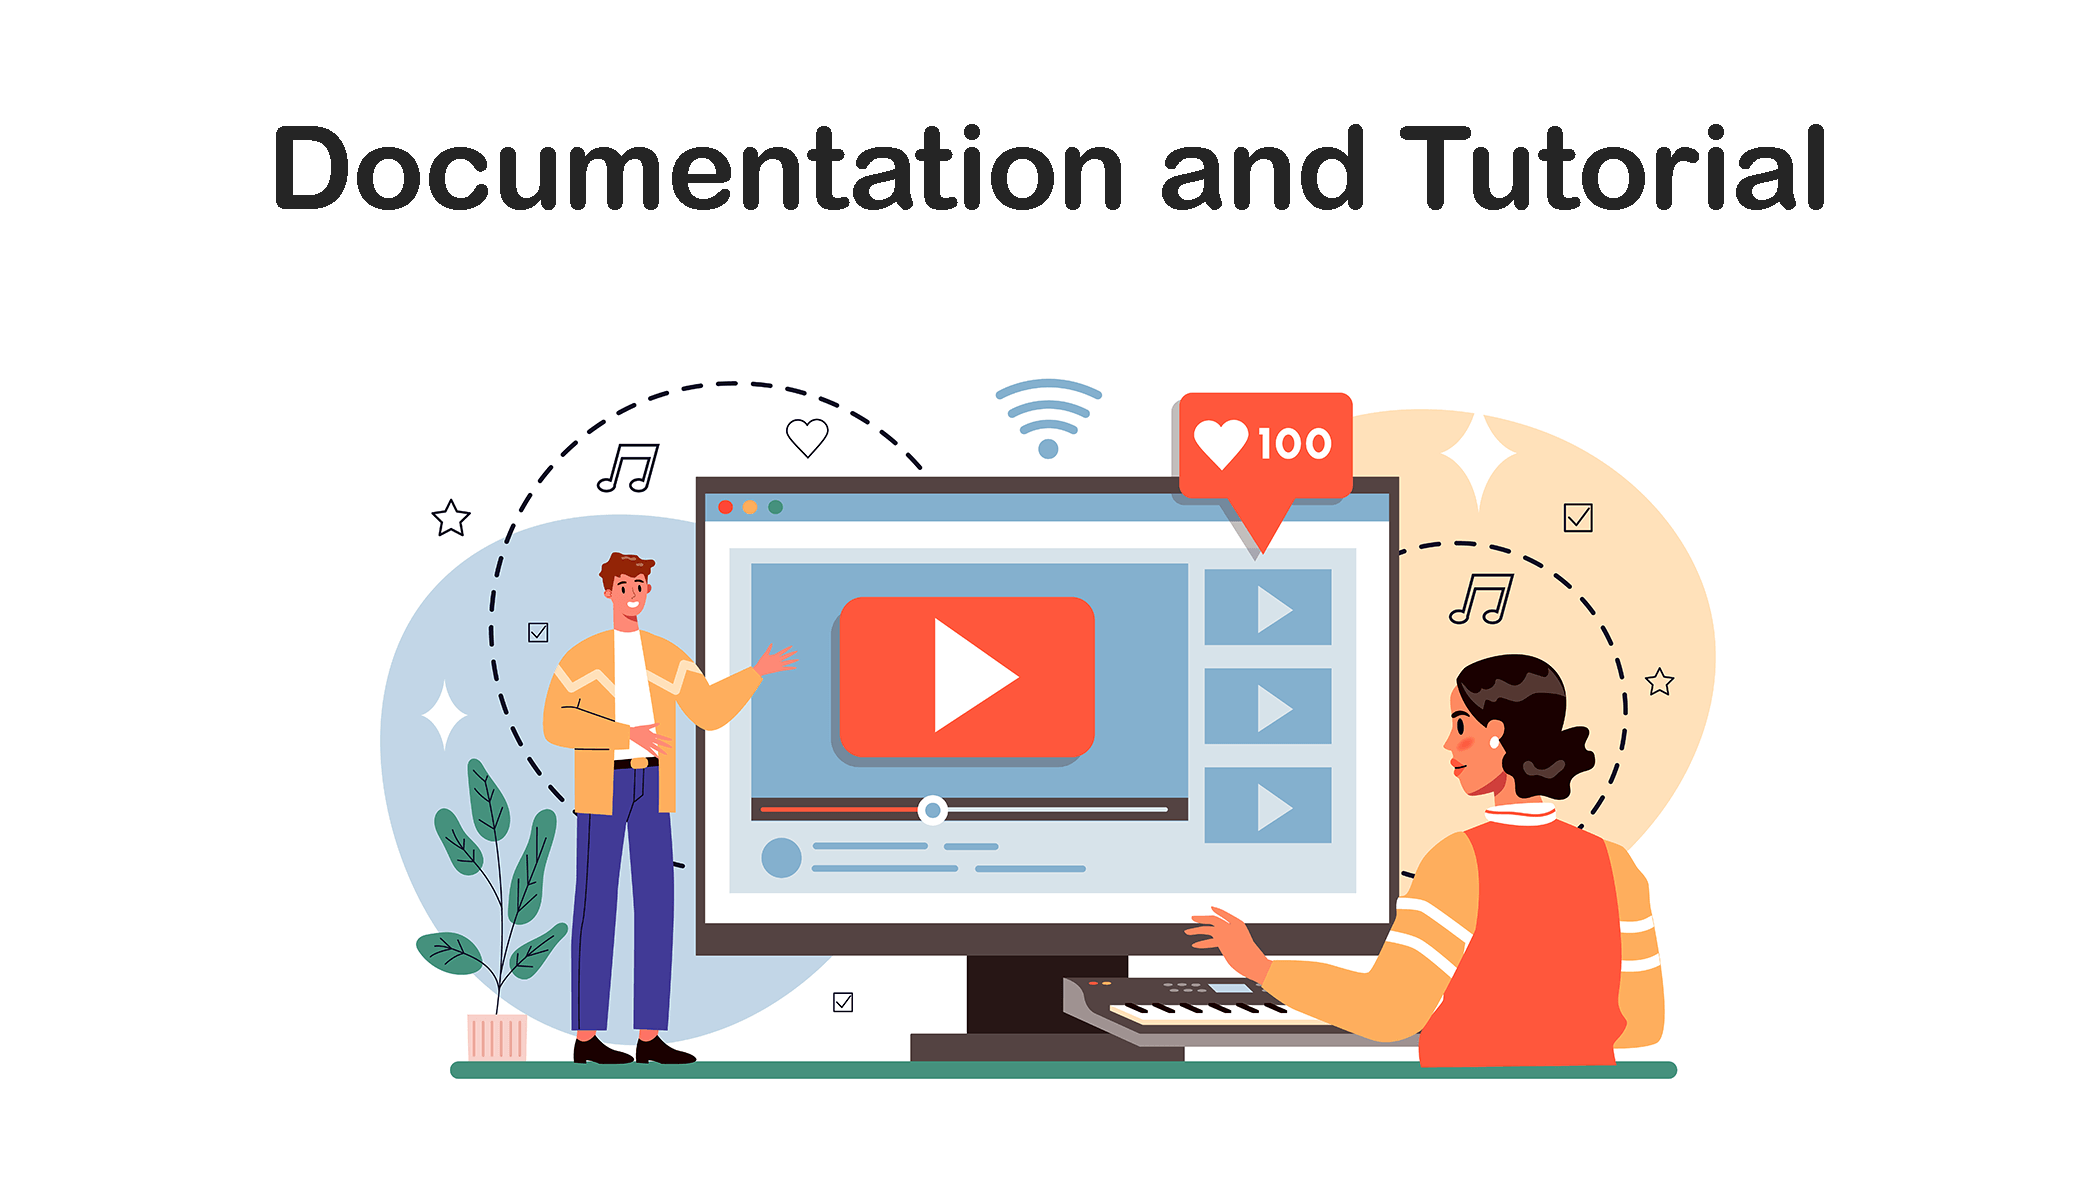 Documentation and tutorial